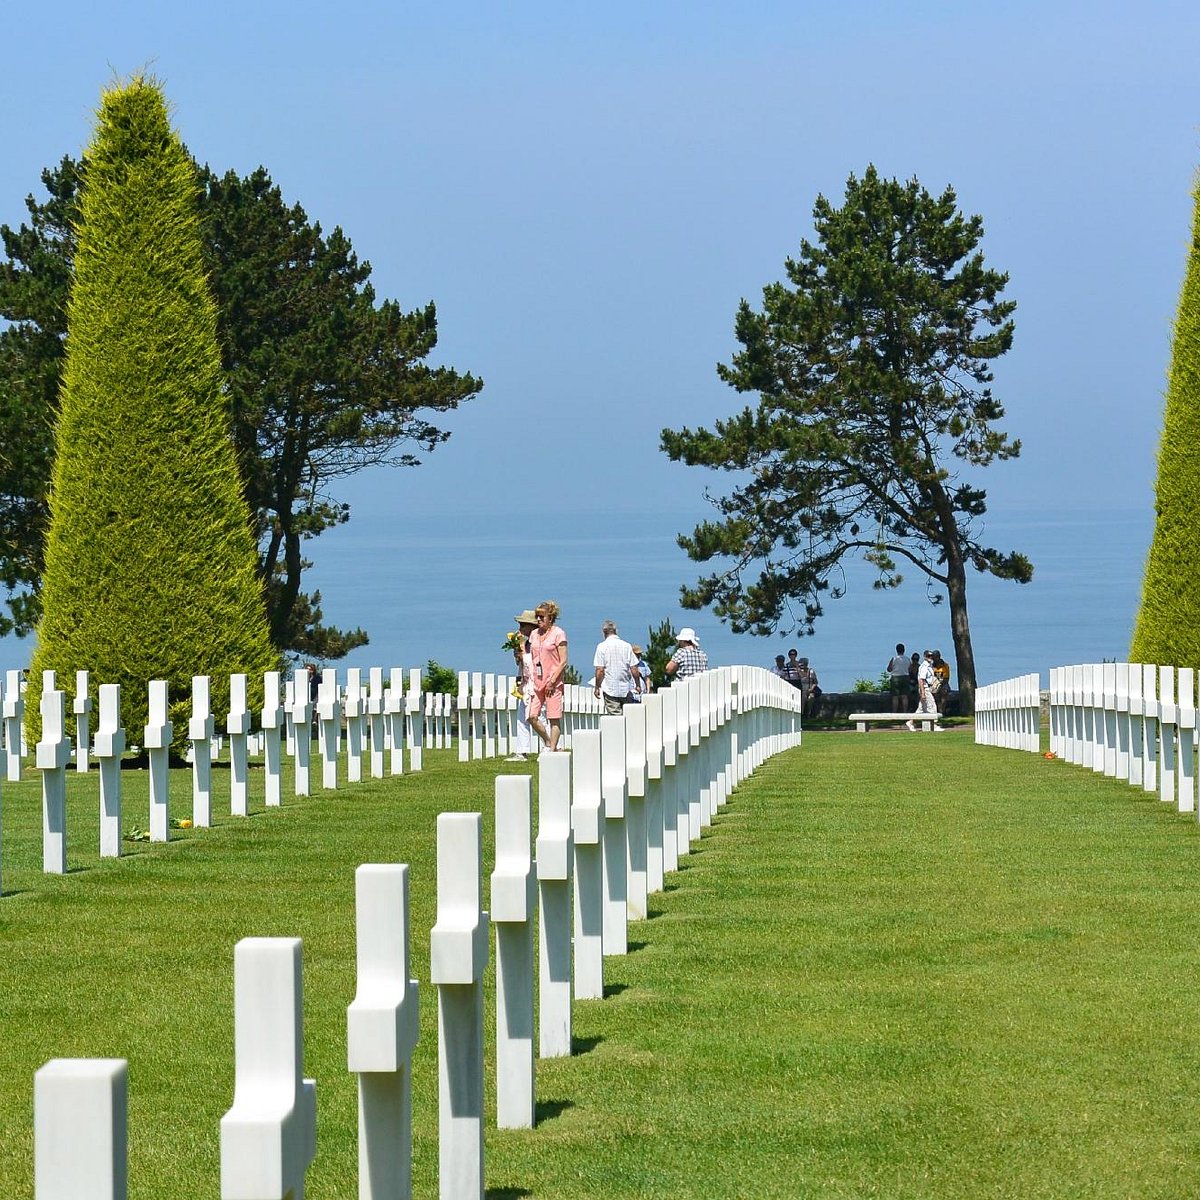 Top 96+ Images normandy american cemetery and memorial photos Full HD, 2k, 4k